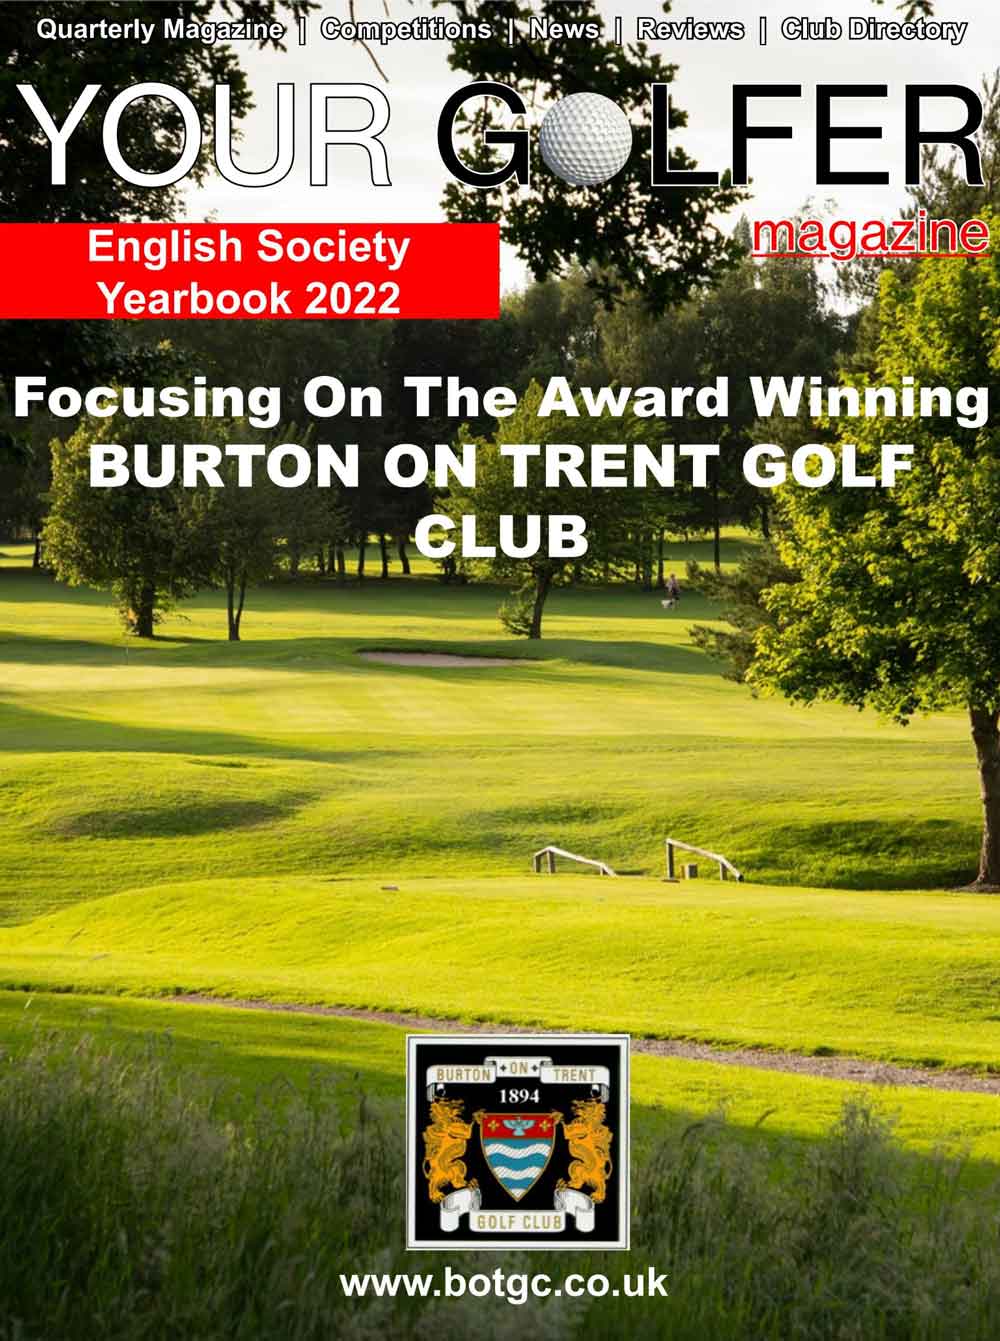 English Society Golf Yearbook 2022 from Your Golfer Magazine